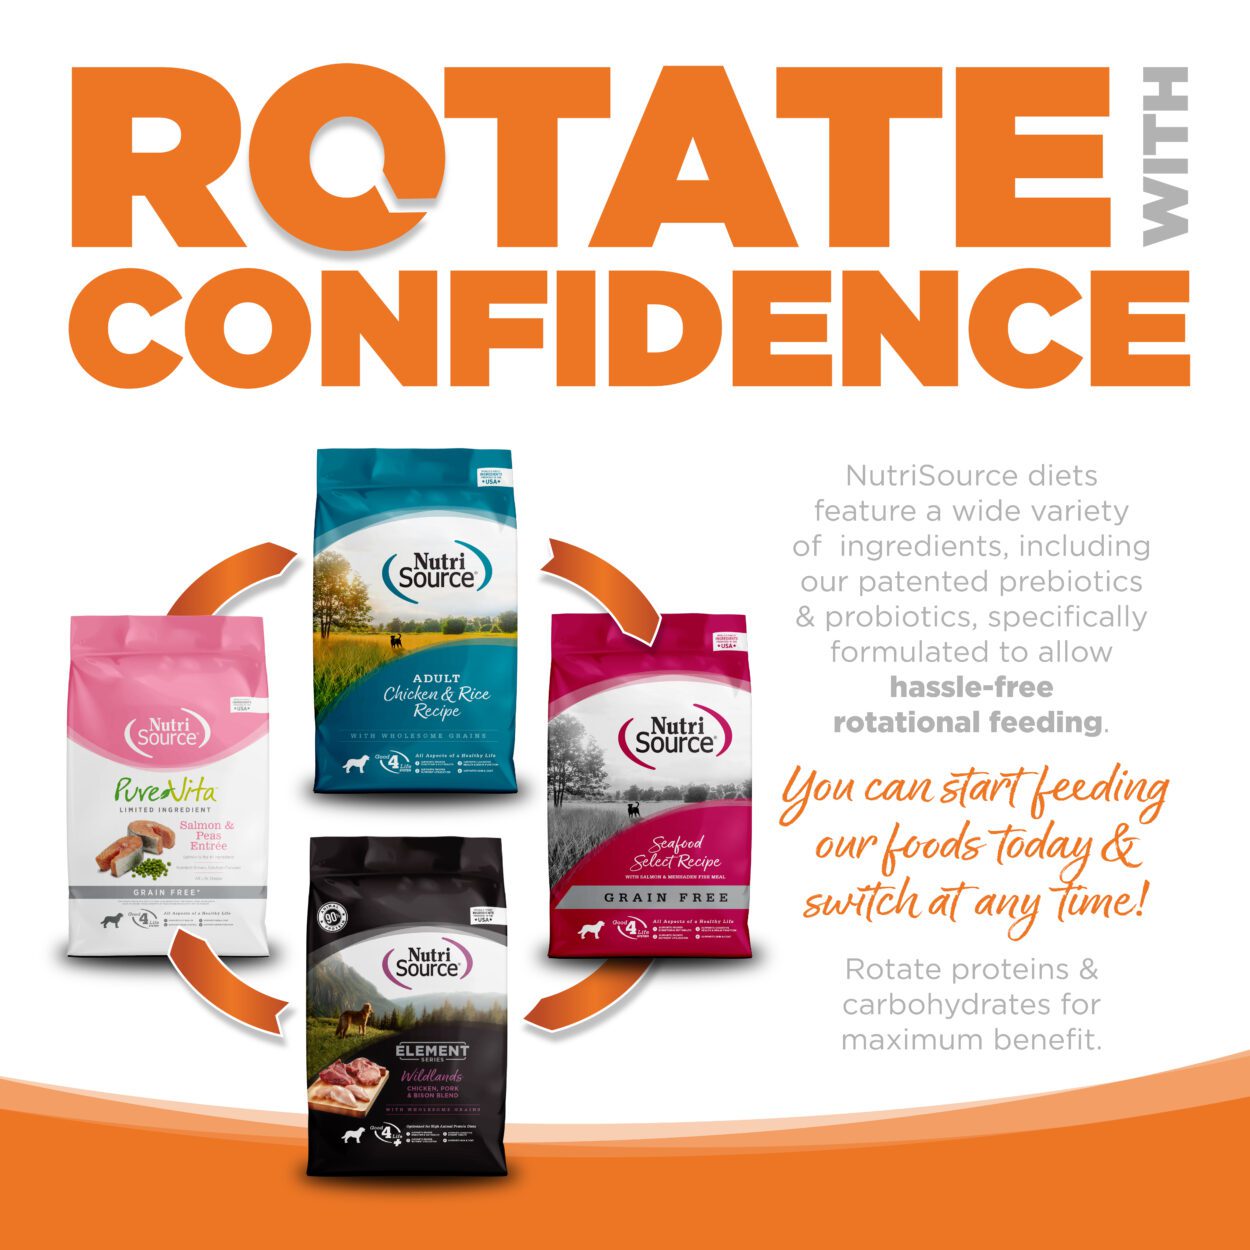 ROTATE WITH CONFIDENCE